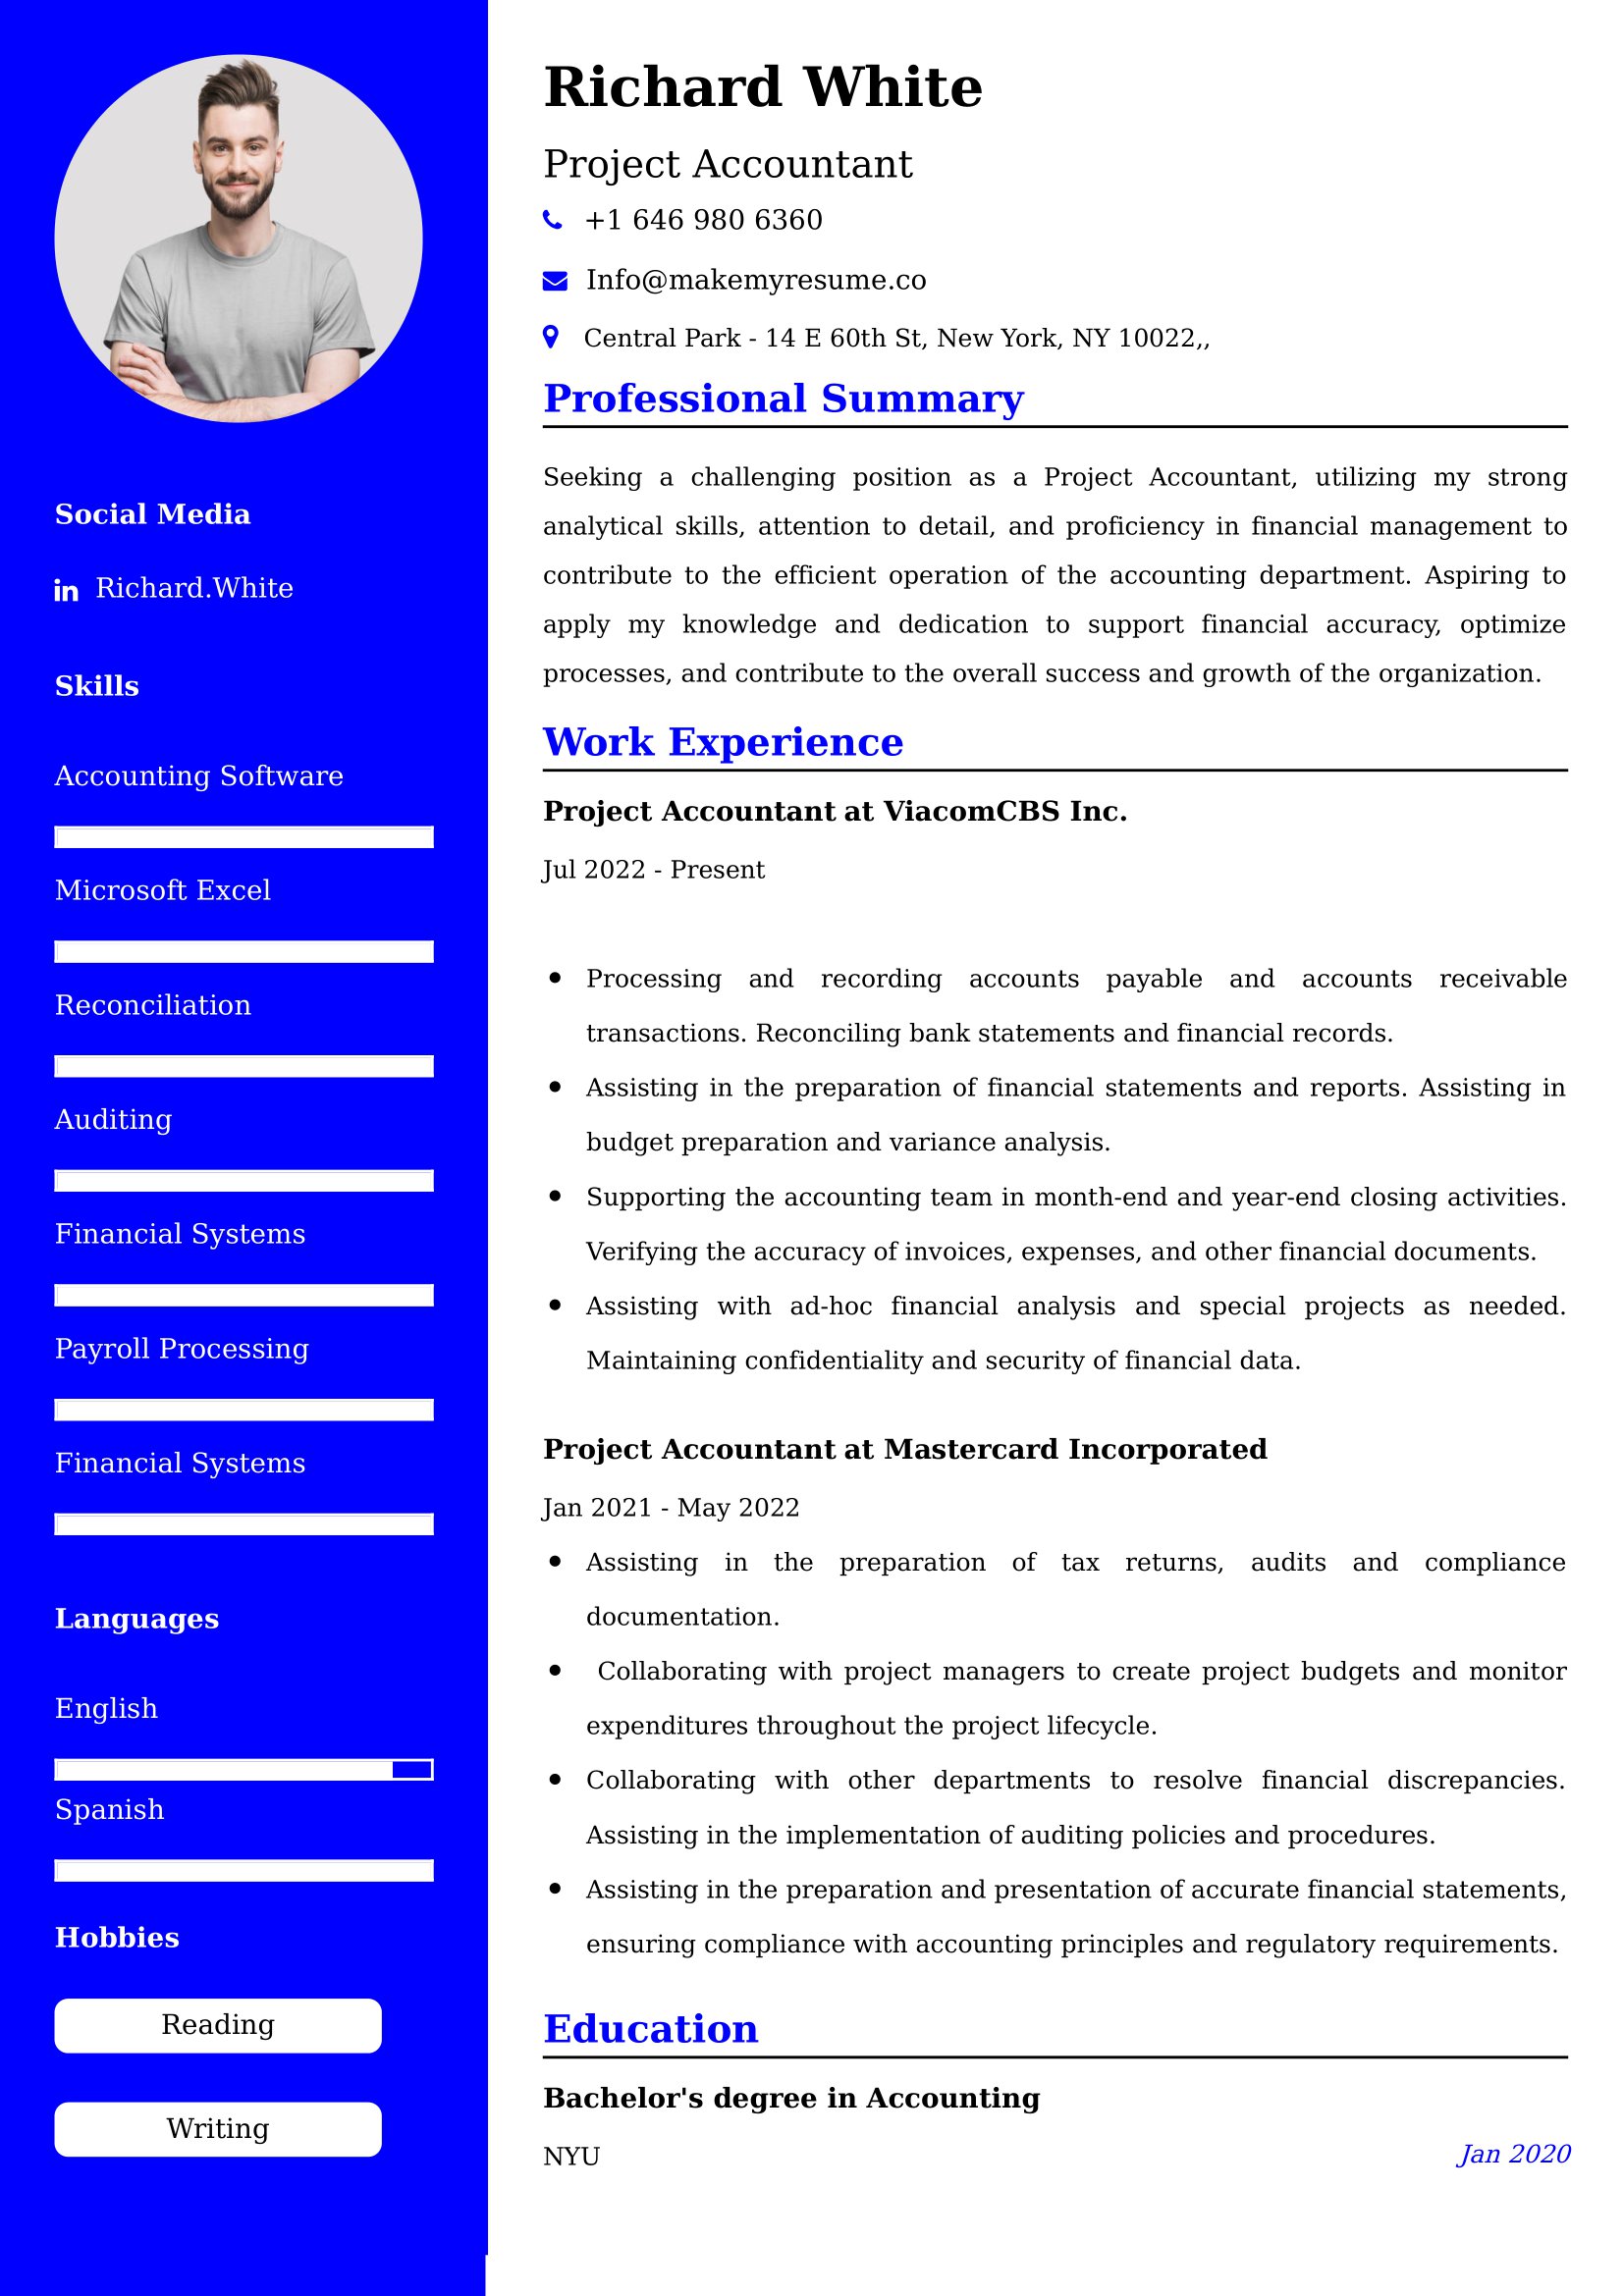 Project Accountant Resume Examples - Brazilian Format, Latest Template